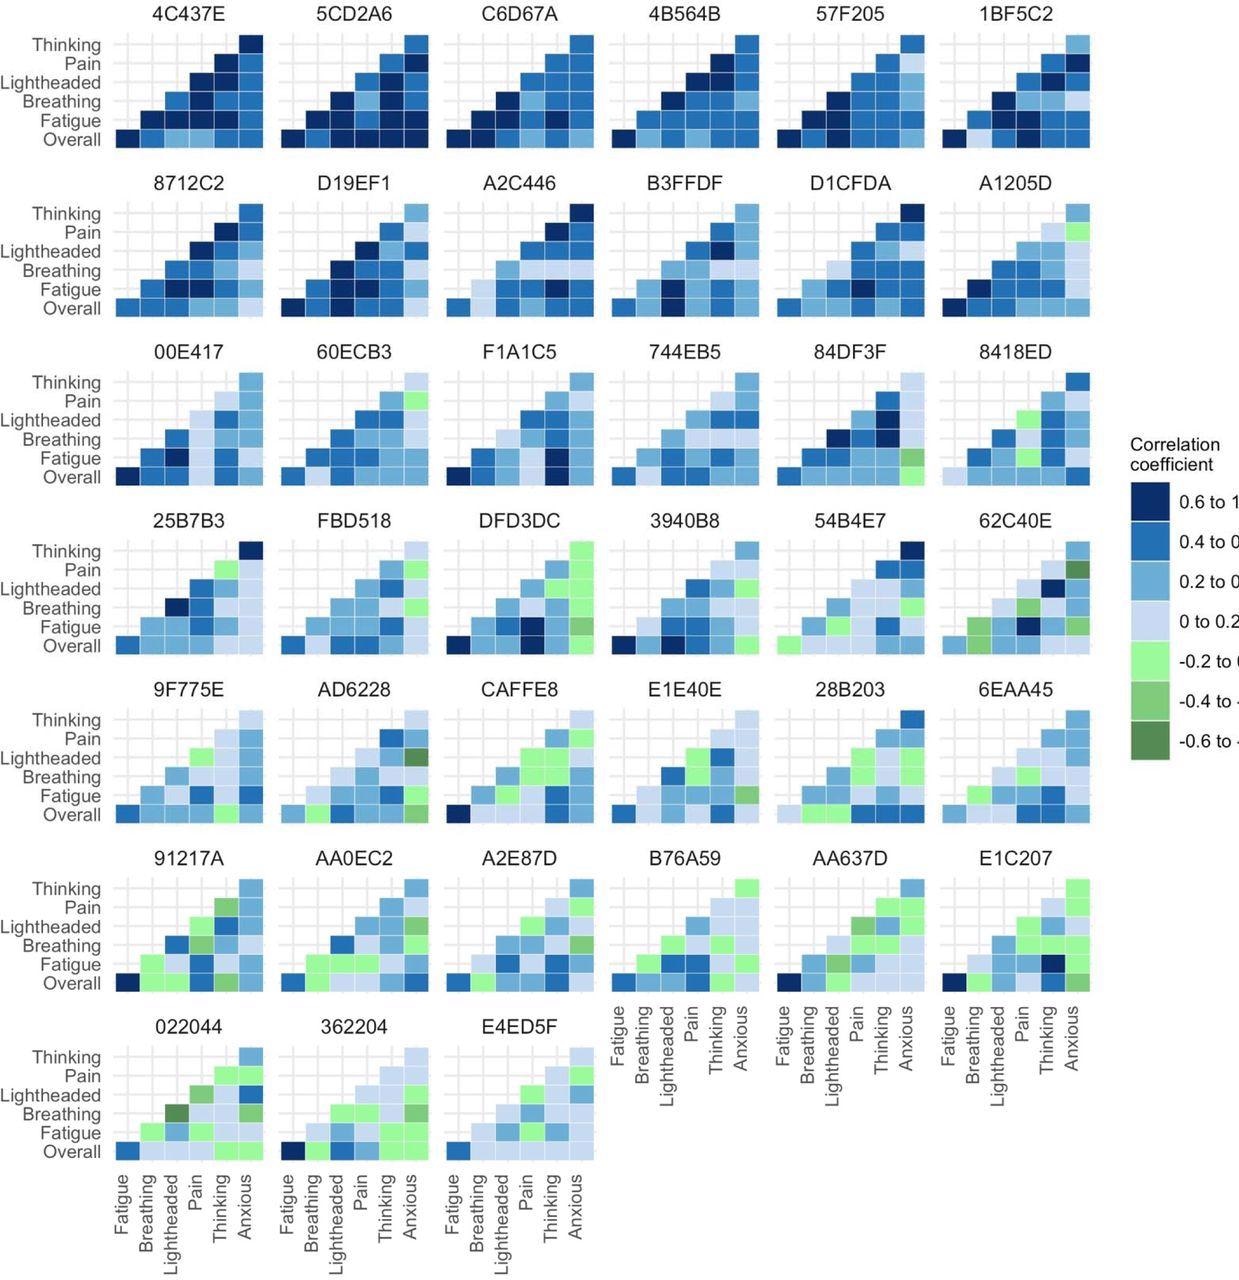 Heatmap of unadjusted correlations between symptoms at the individual participant level. Figure shows only those participants who experienced all relevant symptoms at sufficient level to be included in the correlation analysis.